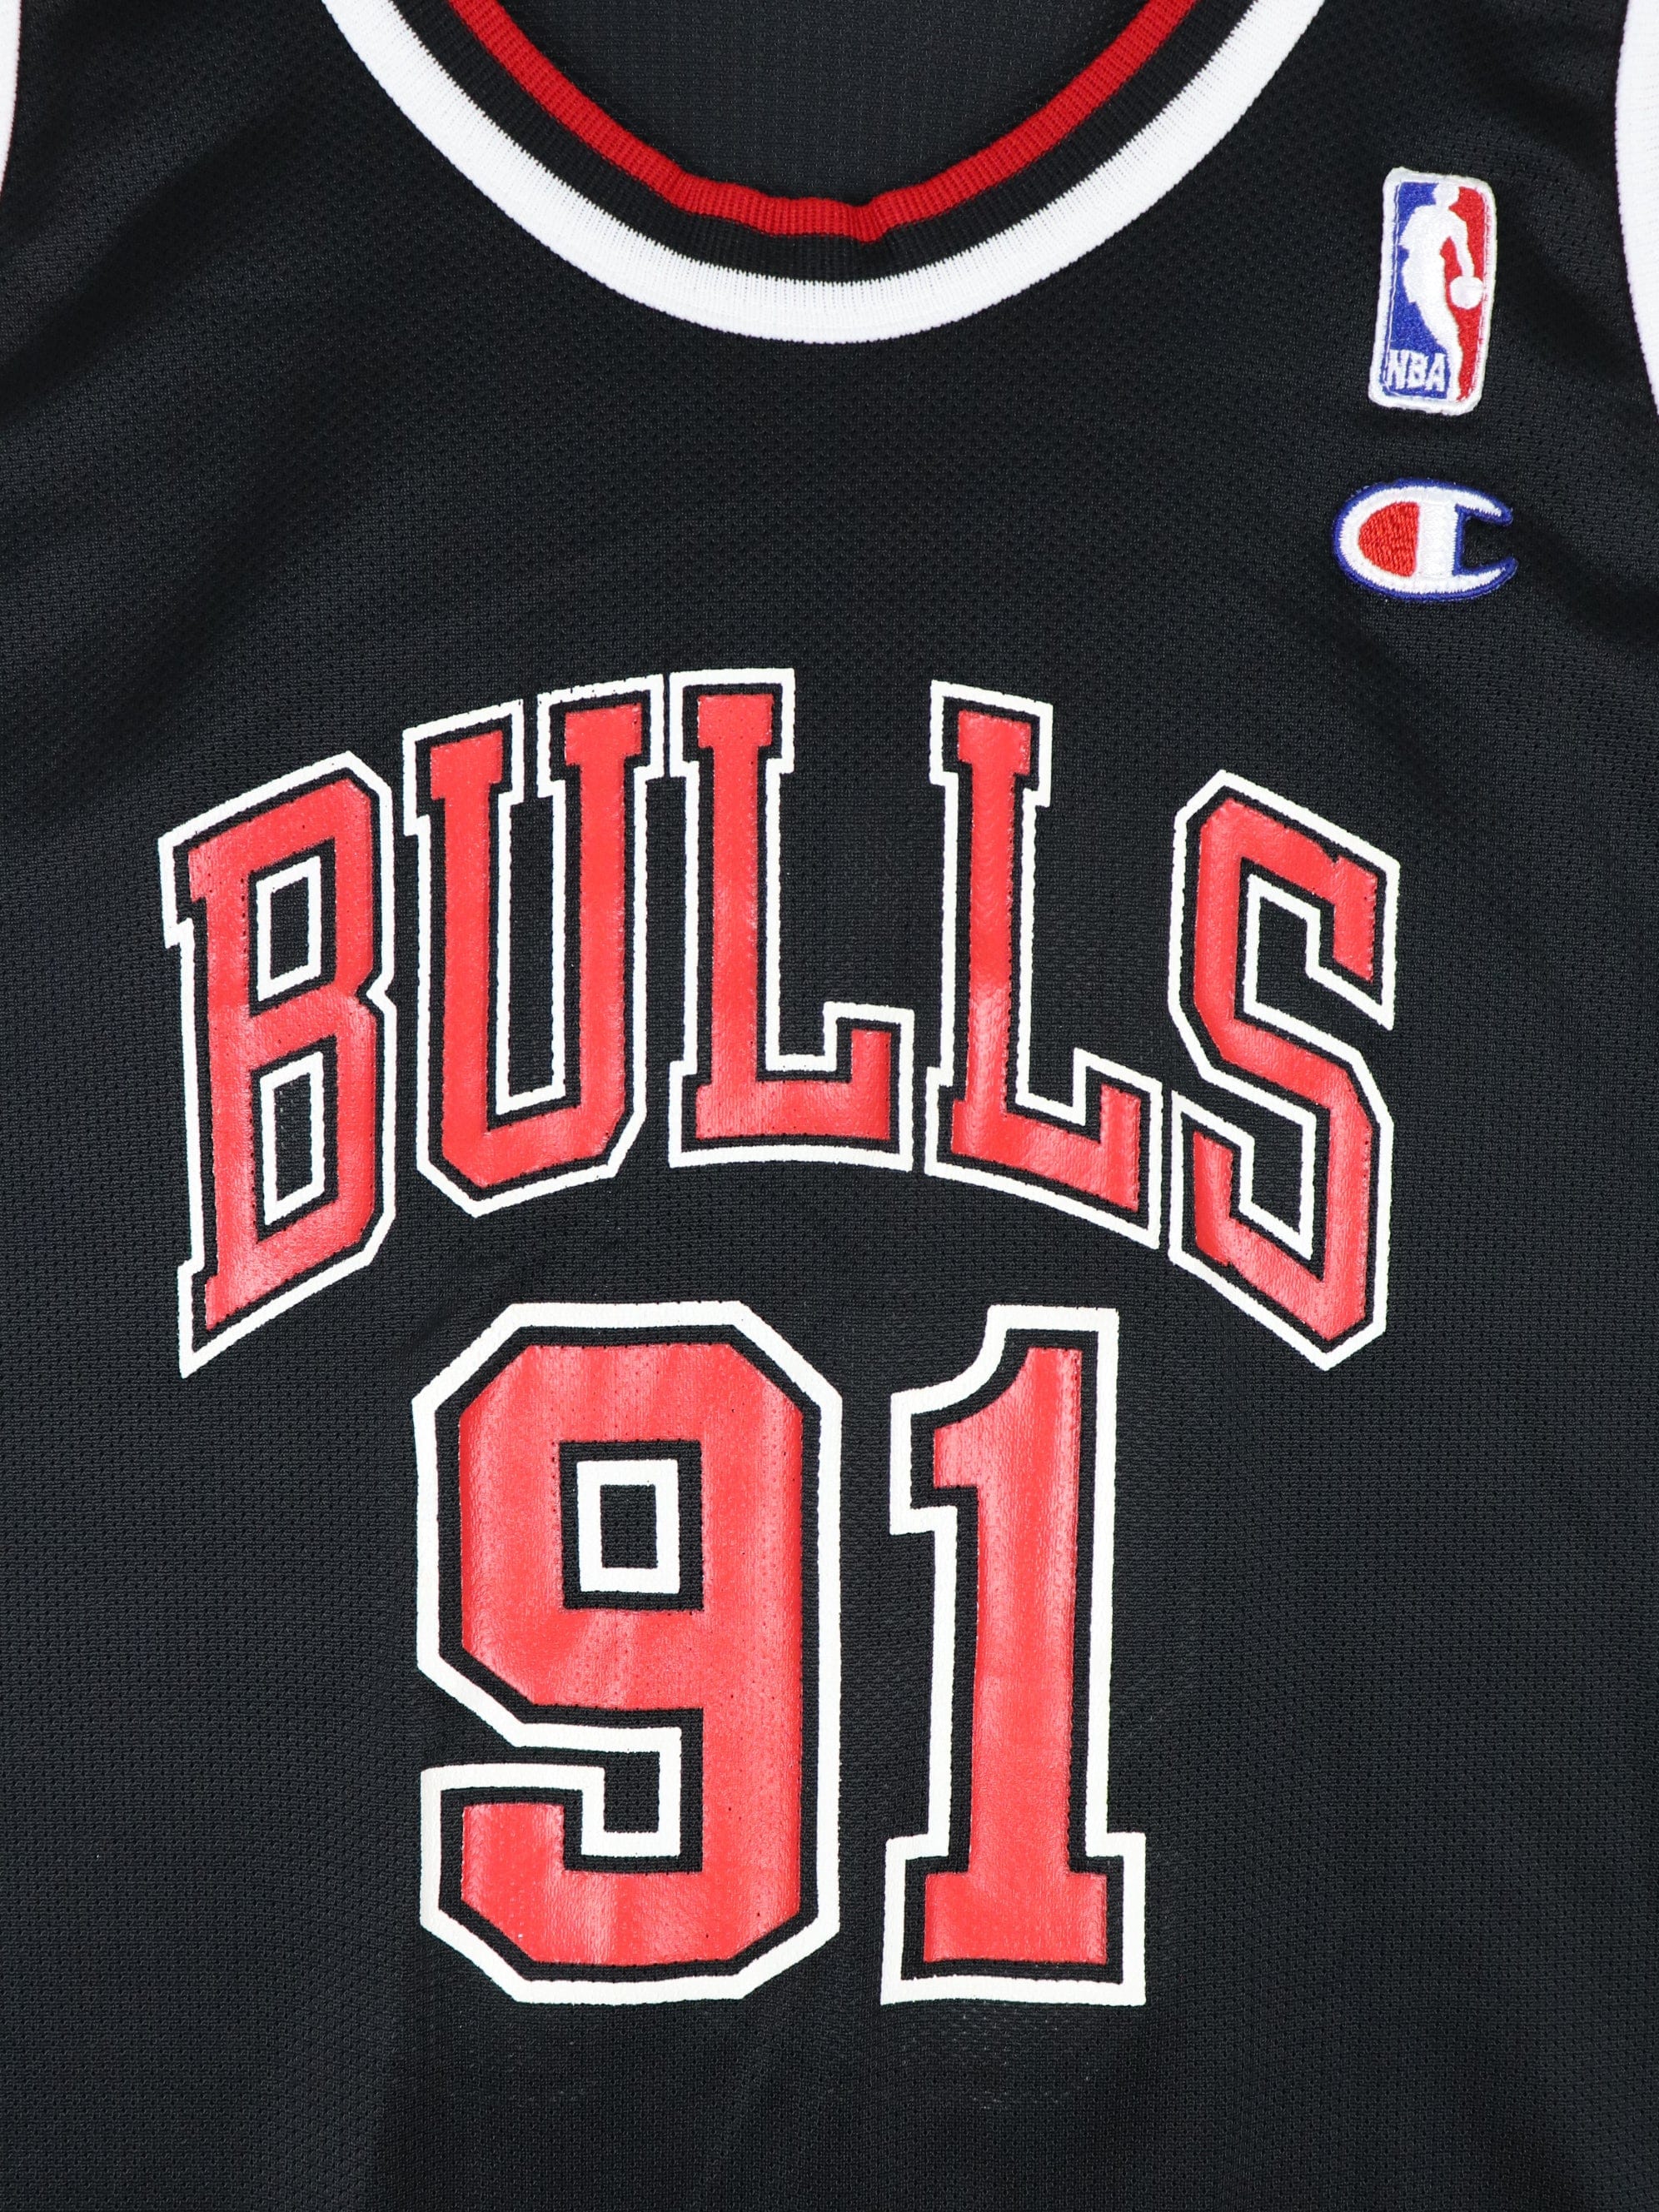 Vintage Dennis Rodman Chicago Bulls champion youth size jersey large 14 -  16 Home court colorway white with red accents this is a vintage champions p  for Sale in Mesquite, TX - OfferUp